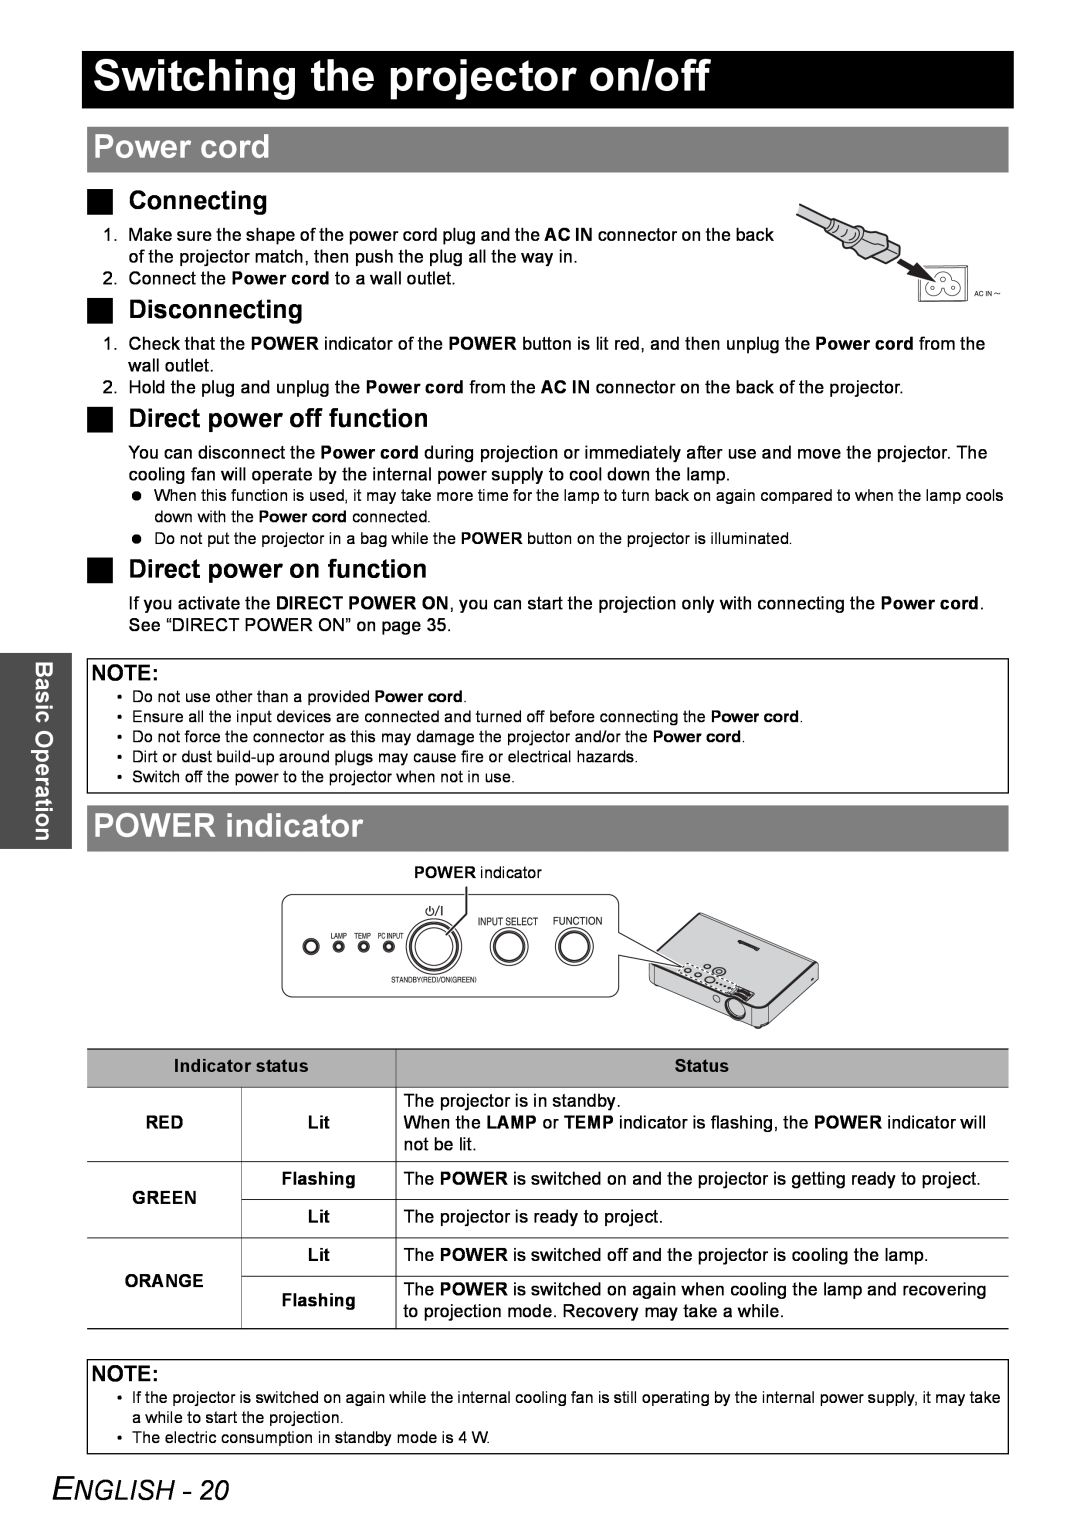 Panasonic PT-LB51NTU Switching the projector on/off, Power cord, POWER indicator, Connecting, Disconnecting, English 